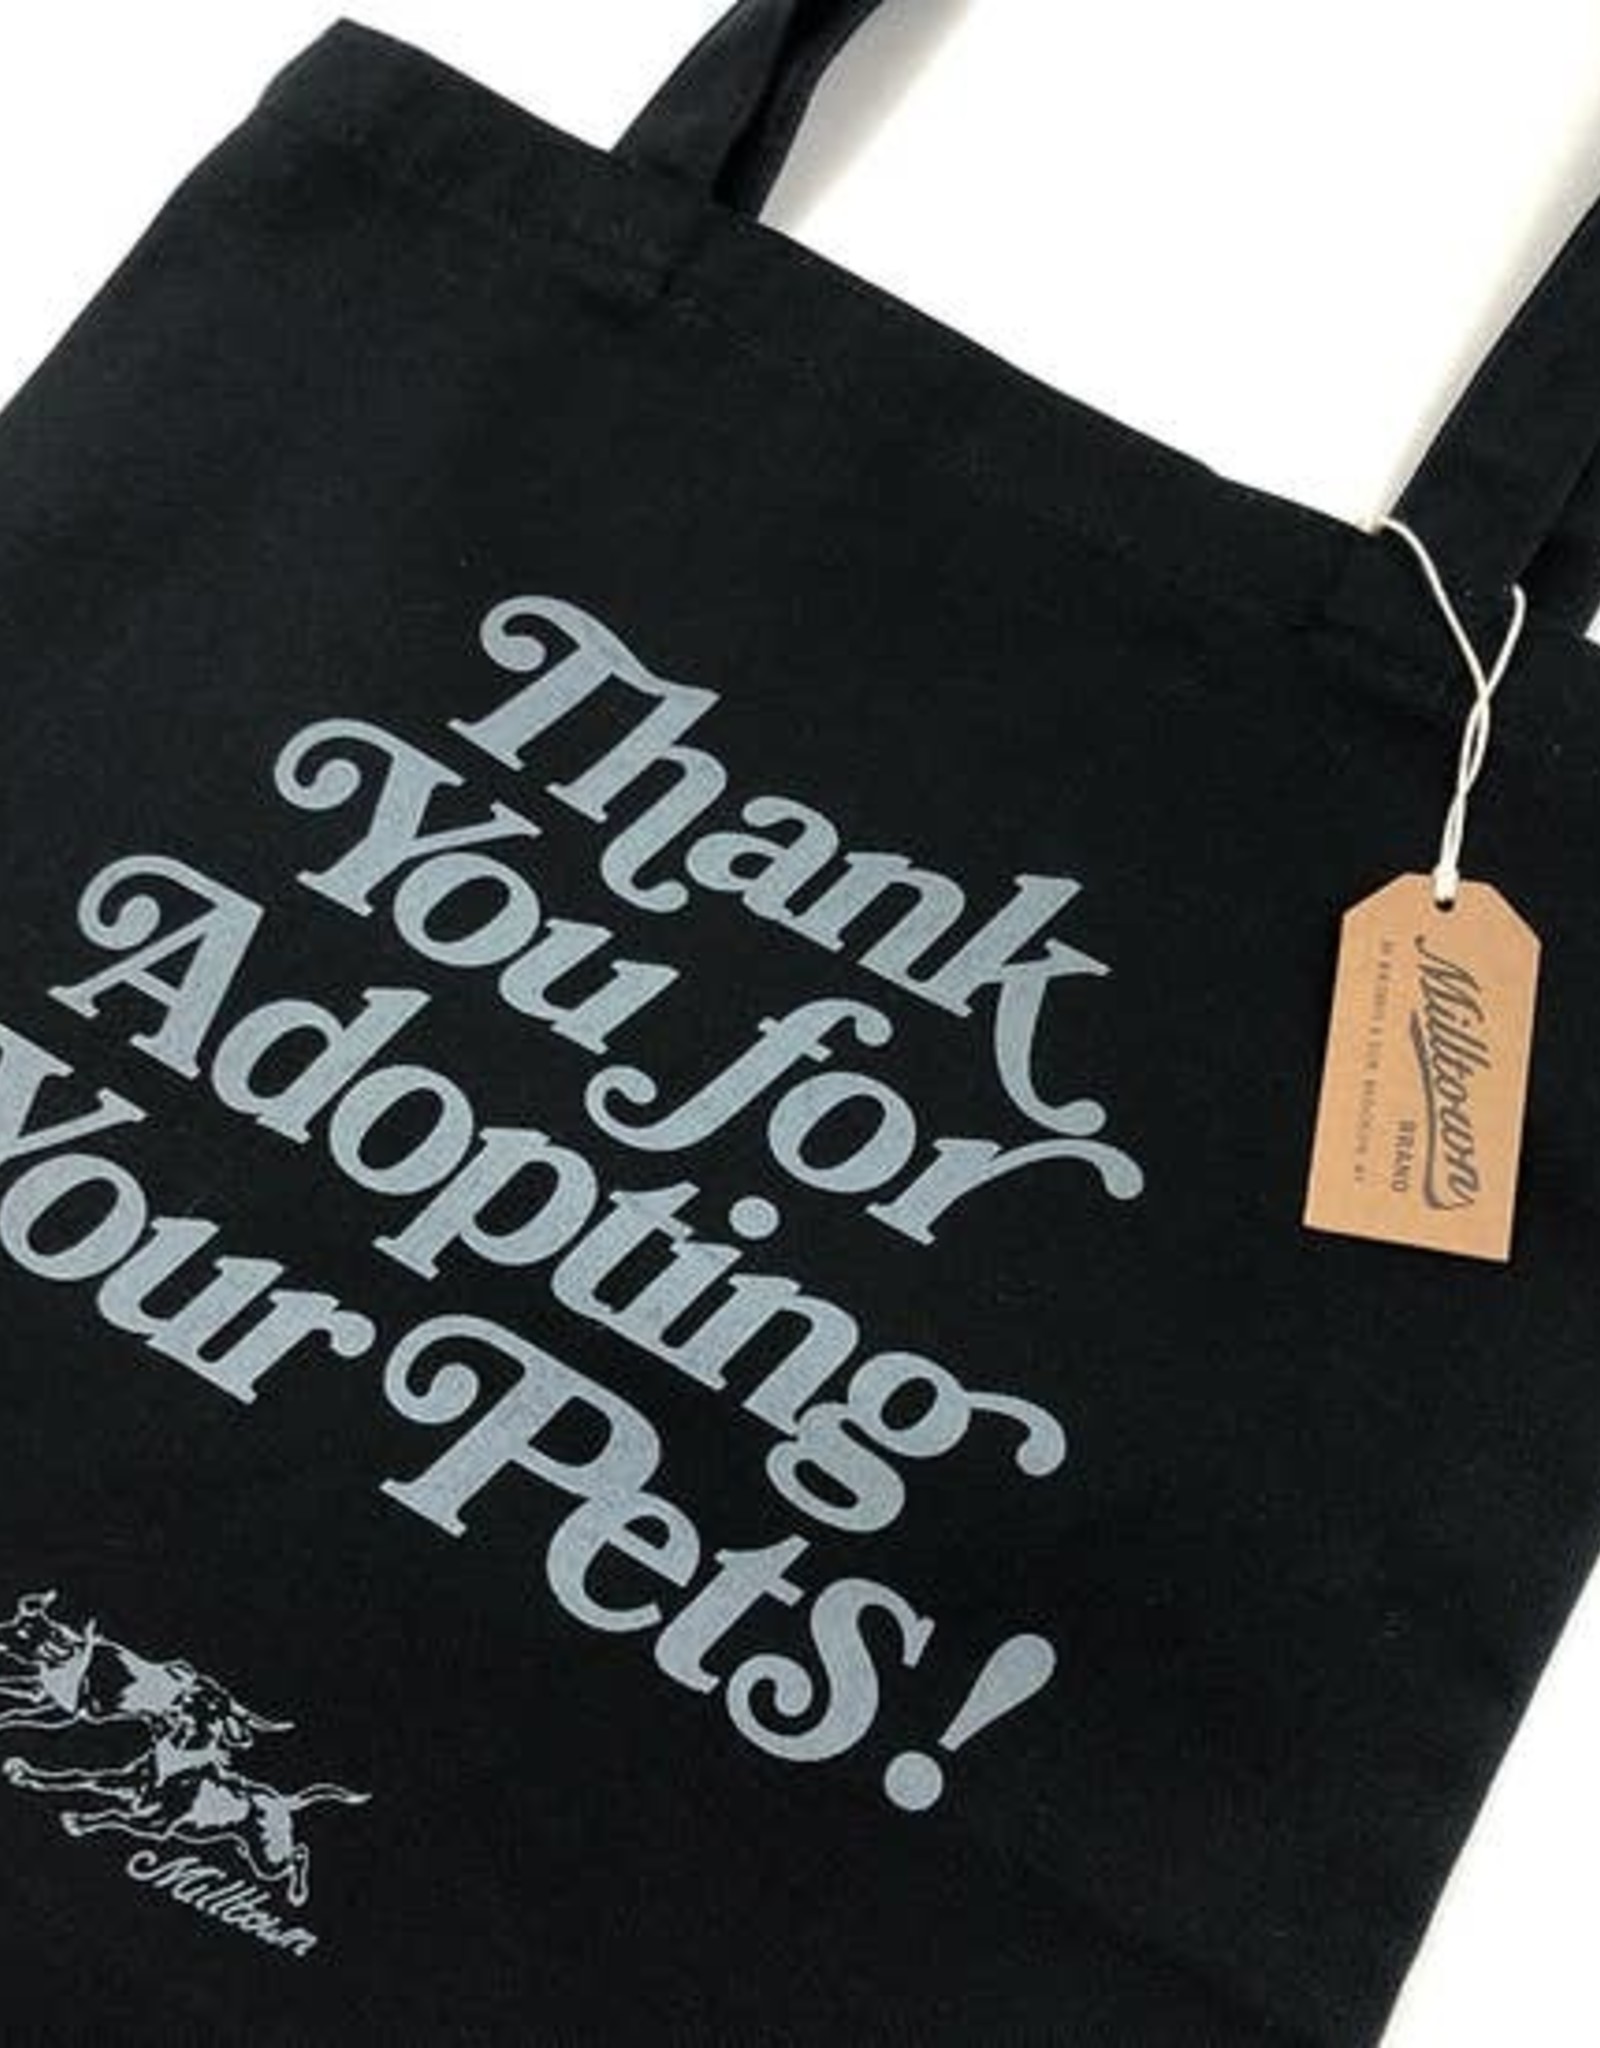 Milltown Brand Thank You for Adopting Tote - Black